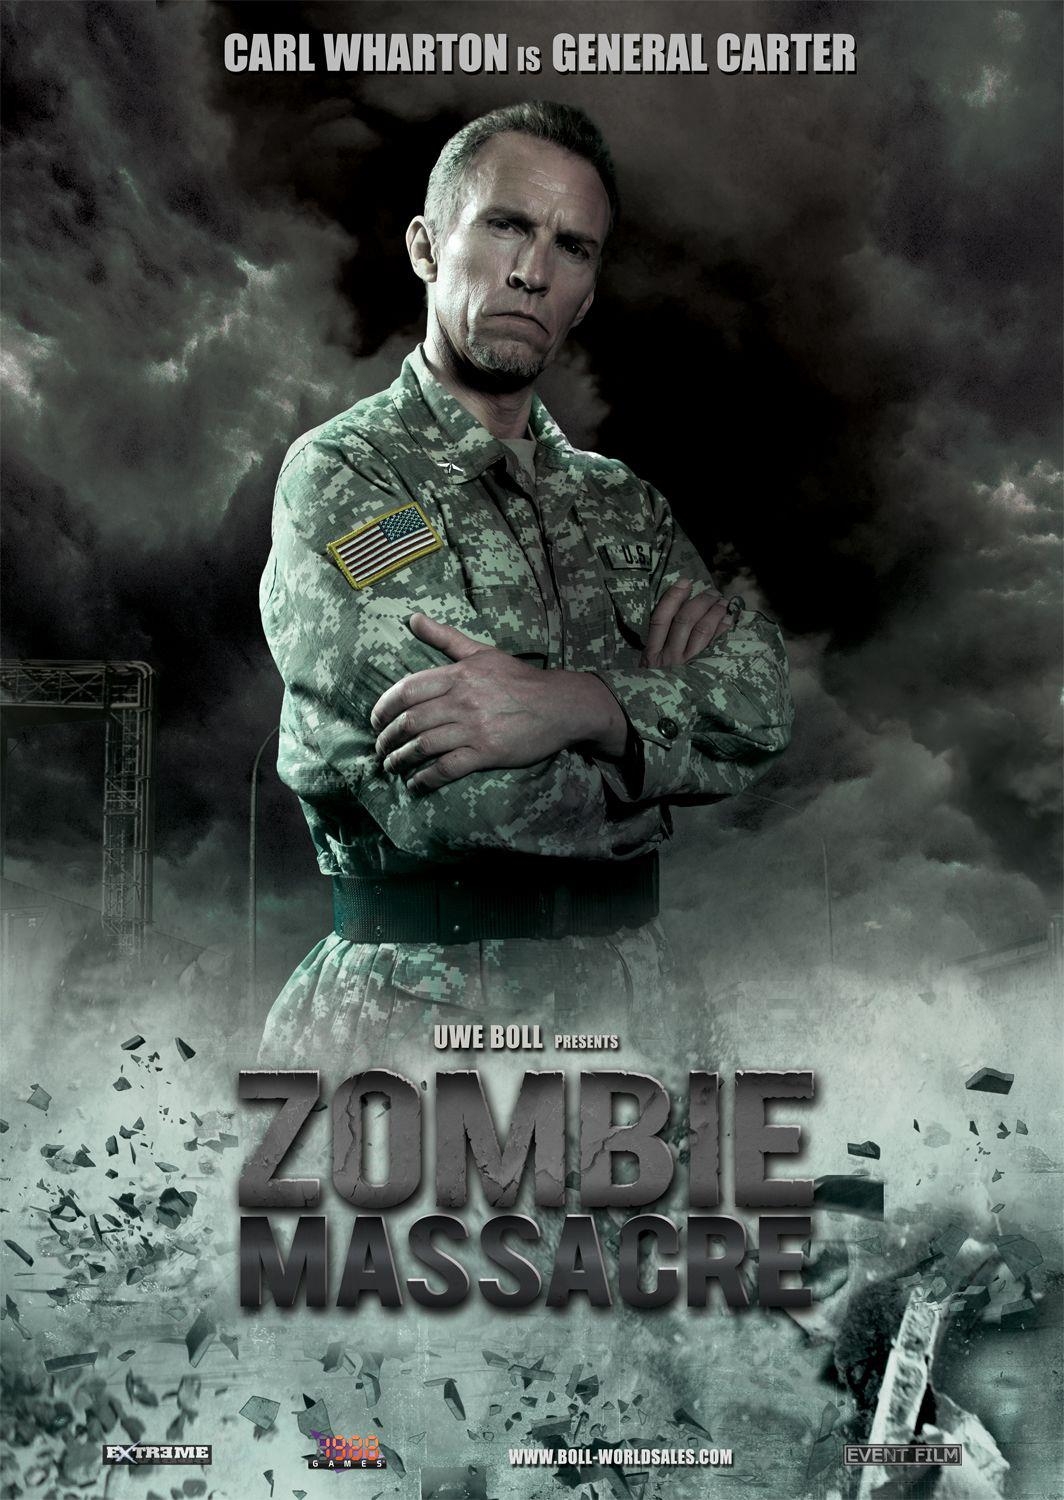 Promotional Poster of General Carter in Zombie Massacre.